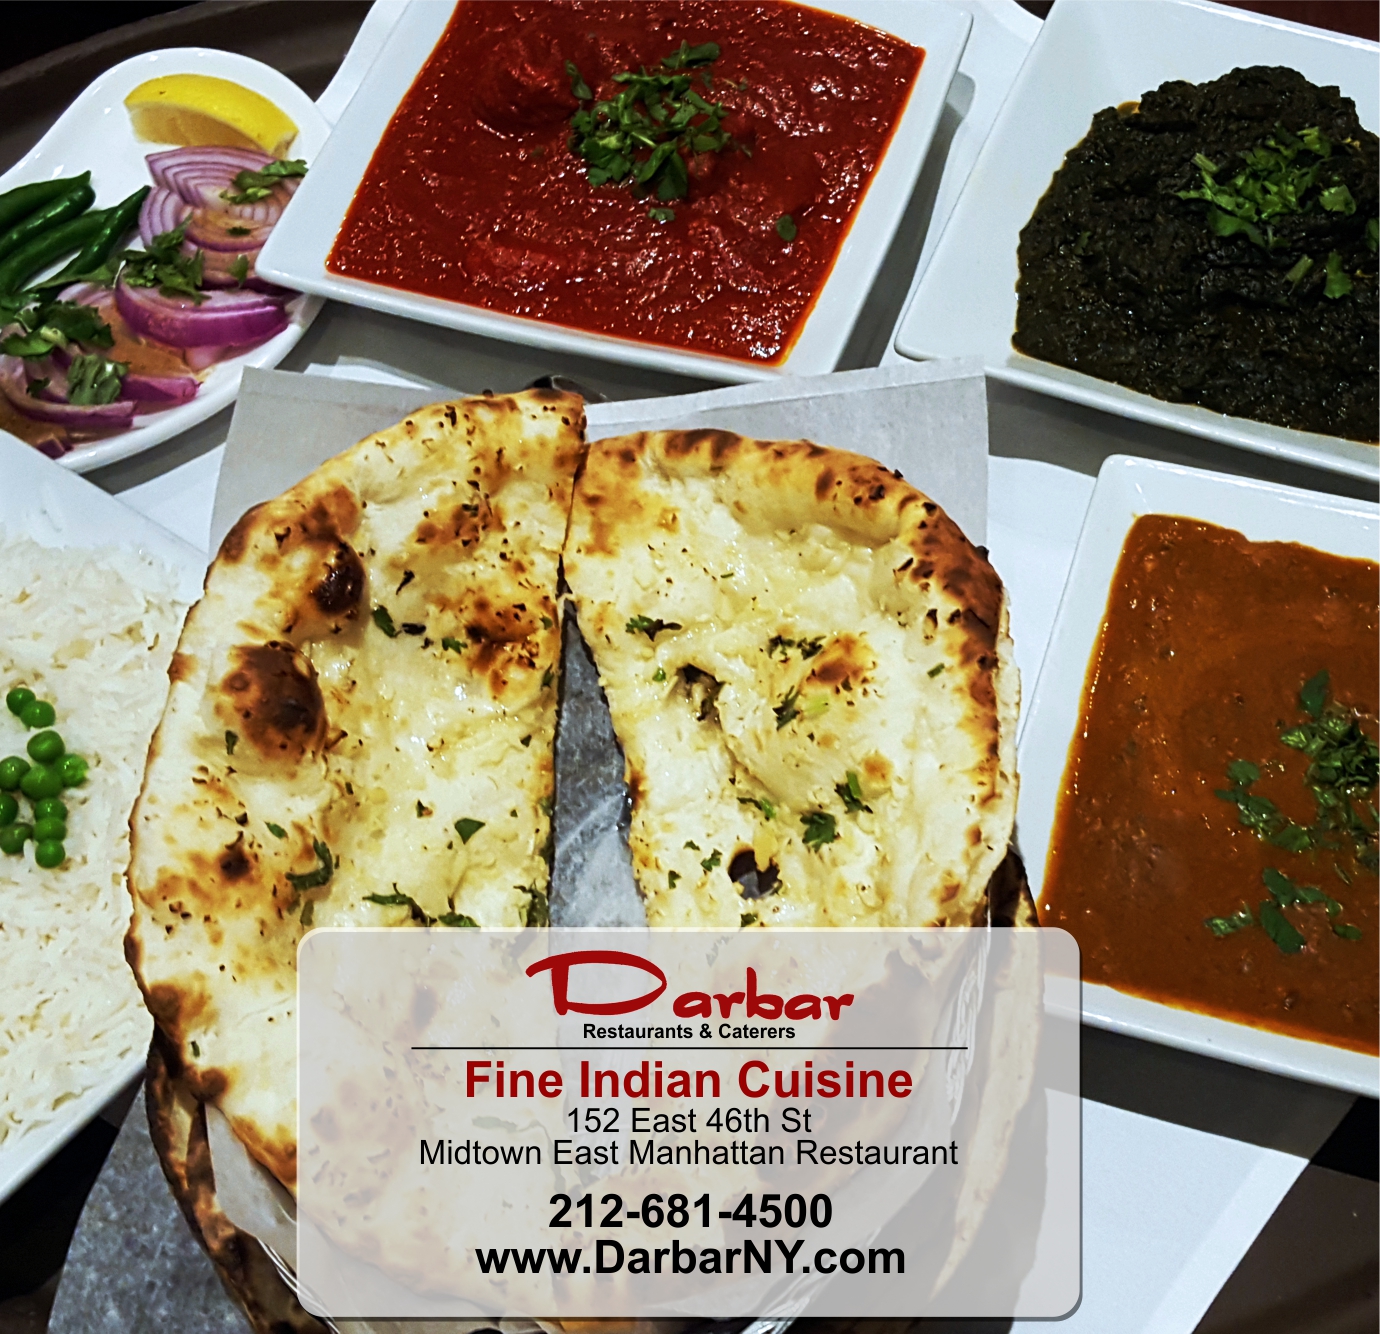 Join us at Dinnertime to rate our service and our cuisine